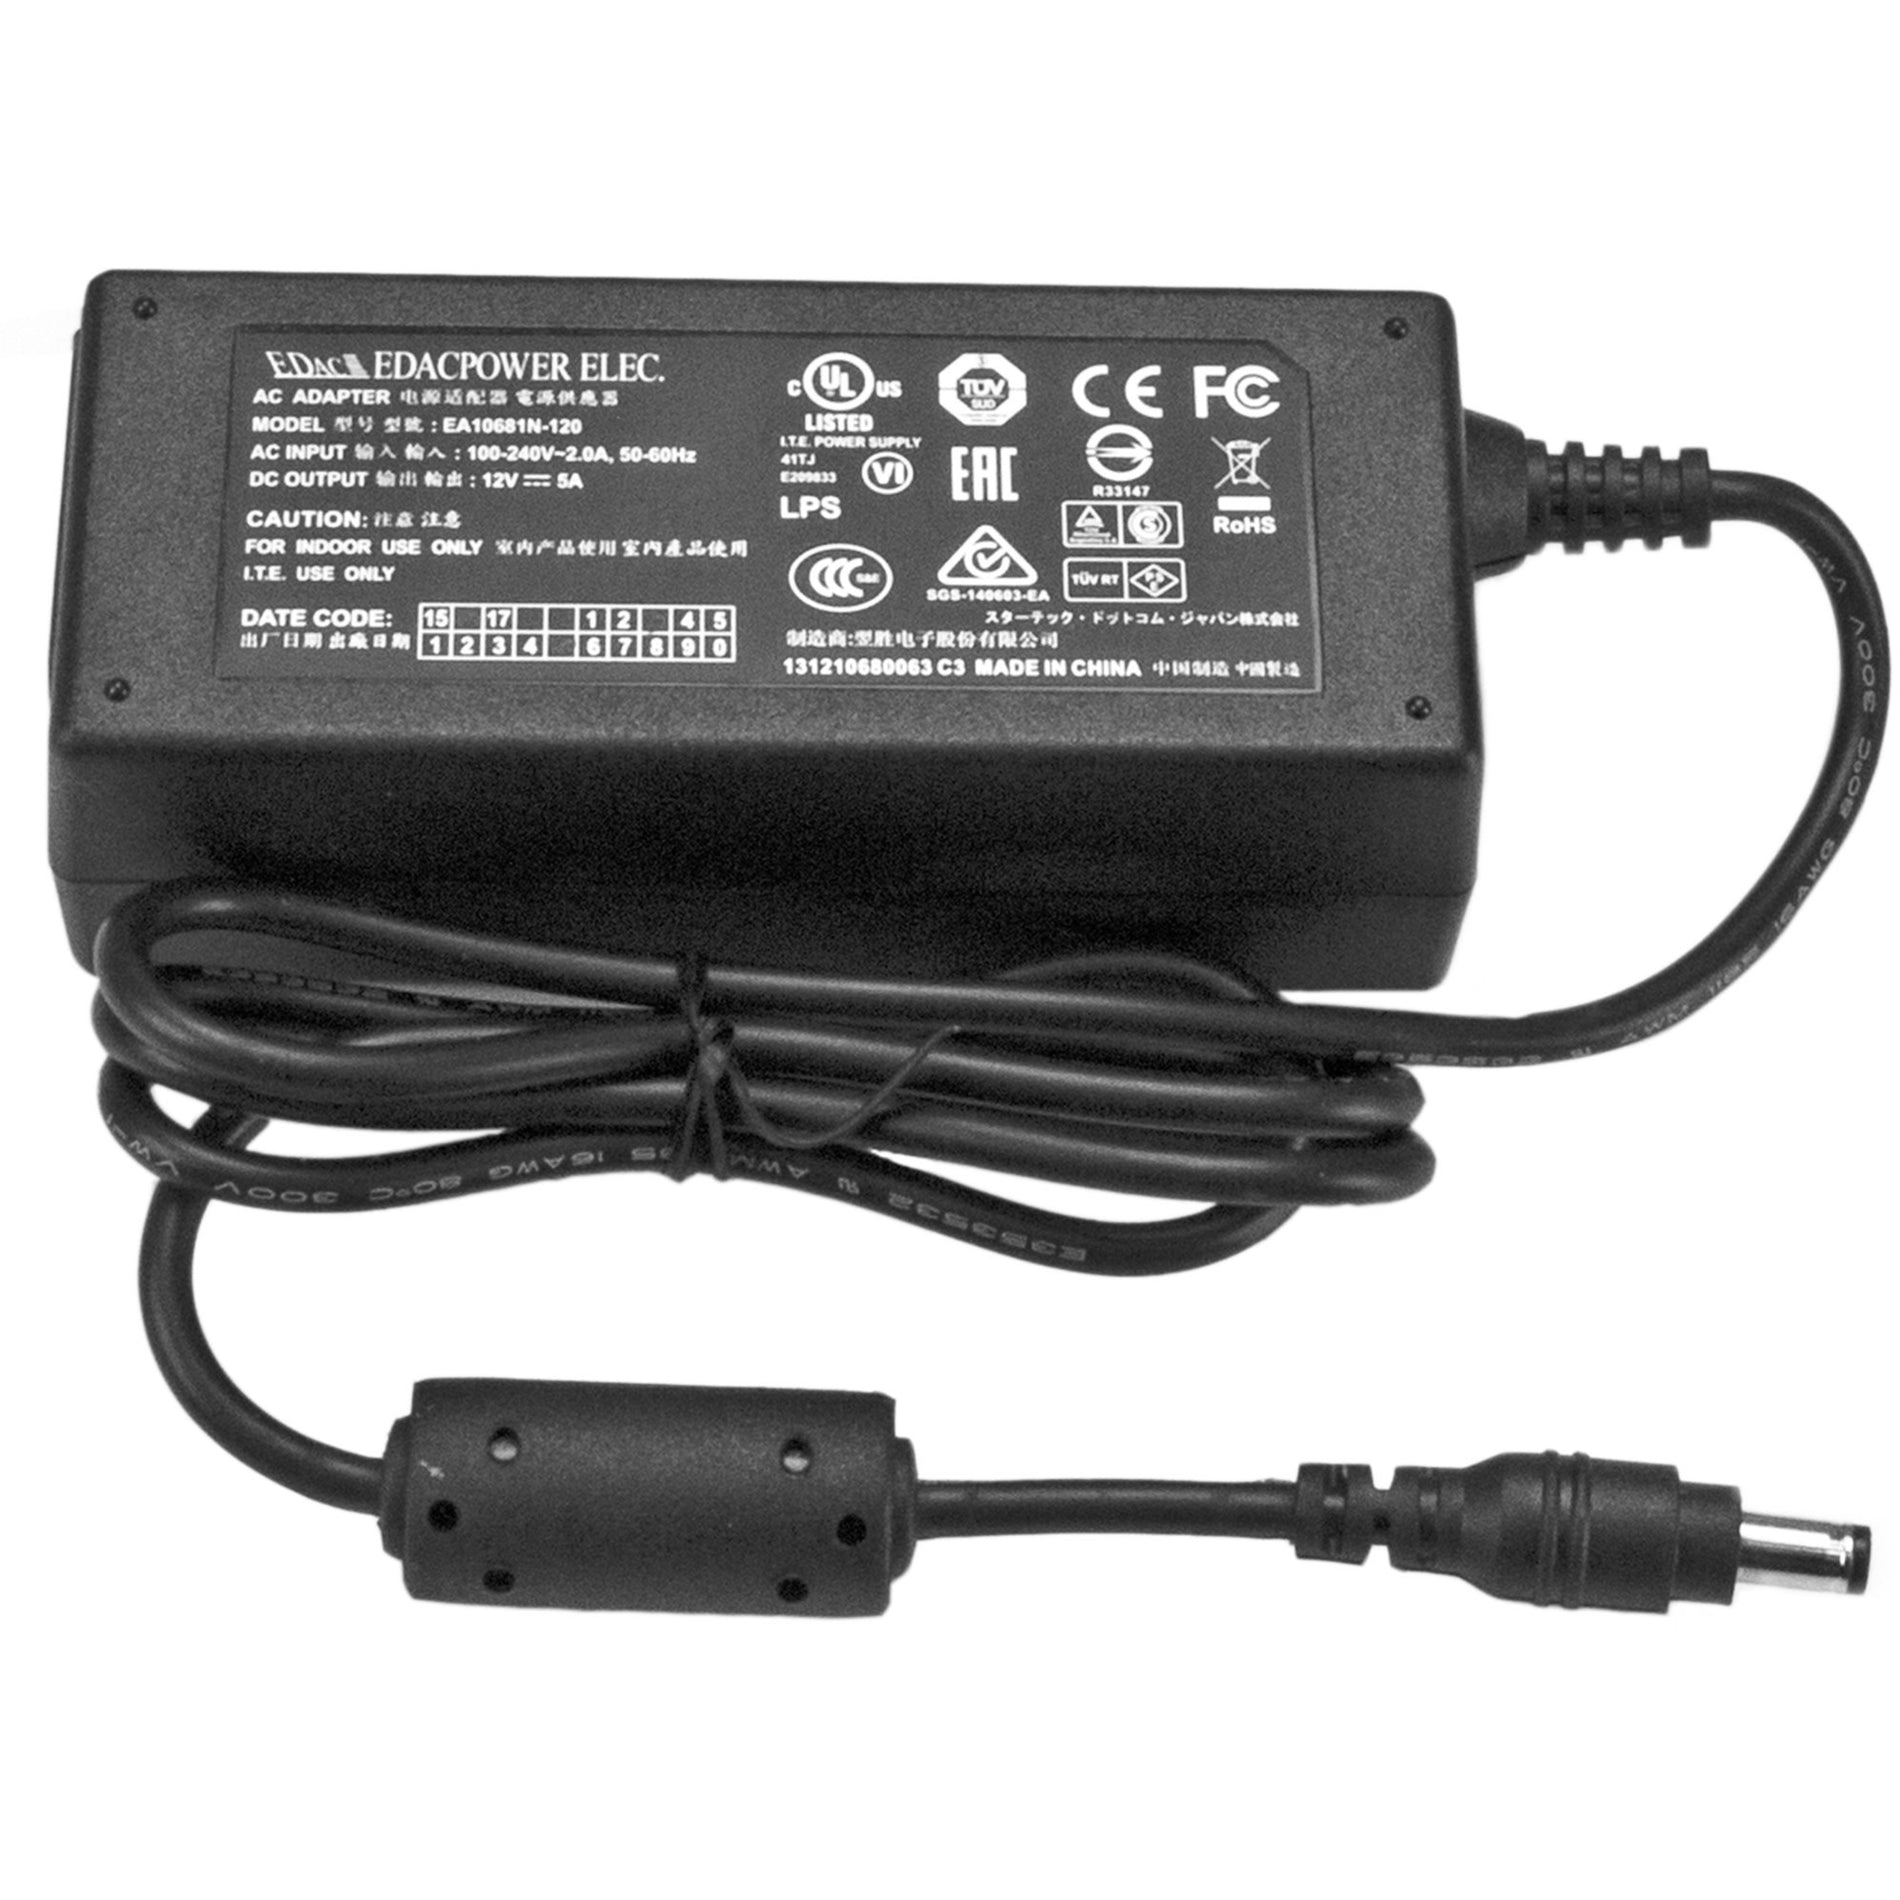 StarTech.com SVA12M5NA Replacement 12V DC Power Adapter - 12 Volts 5 Amps, Limited 2 Year Warranty, RoHS & WEEE Certified